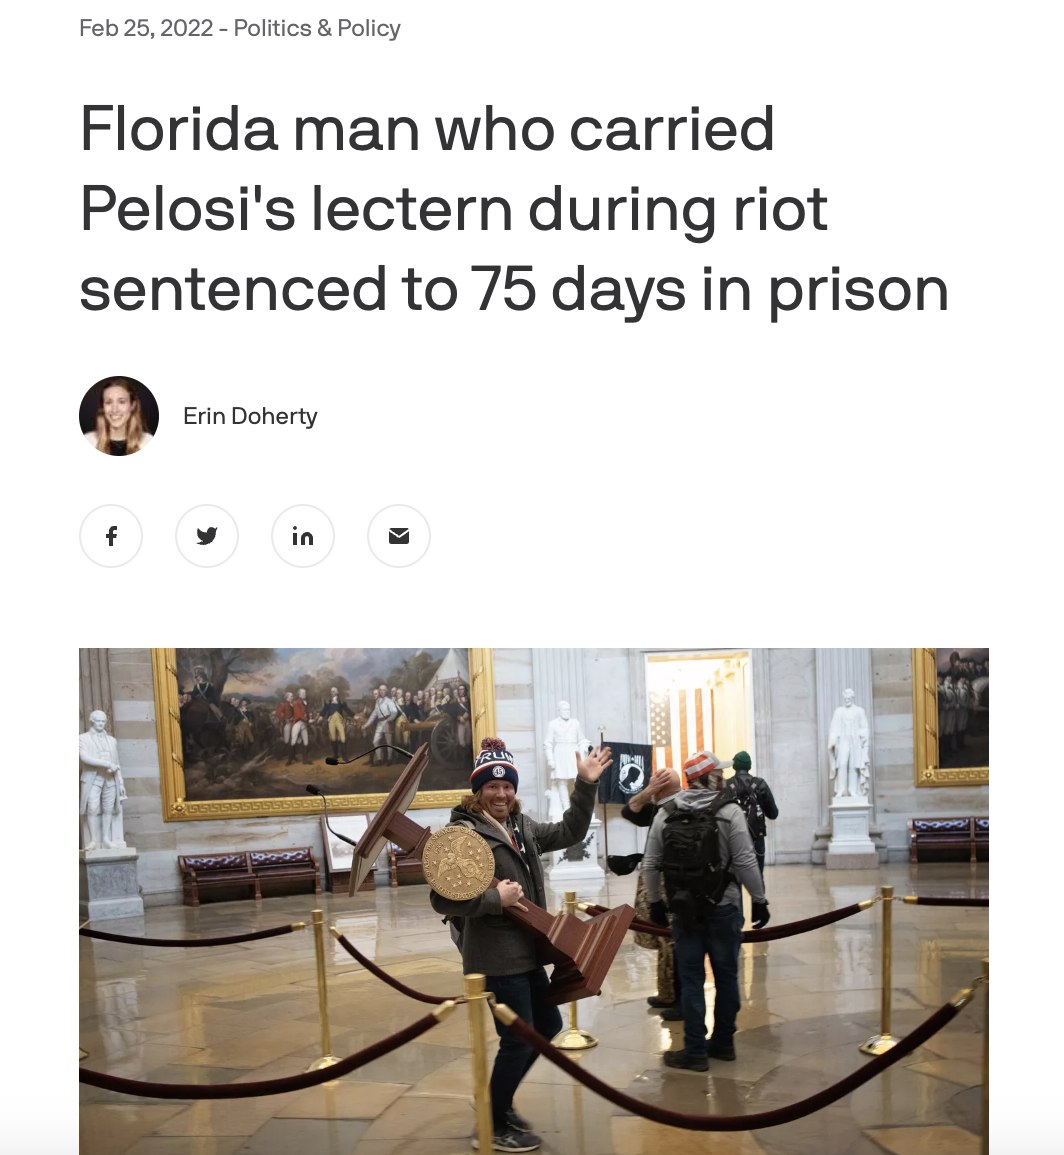 Best of Florida Man 2022 - lectern guy - Politics & Policy Florida man who carried Pelosi's lectern during riot sentenced to 75 days in prison f Erin Doherty in Clin